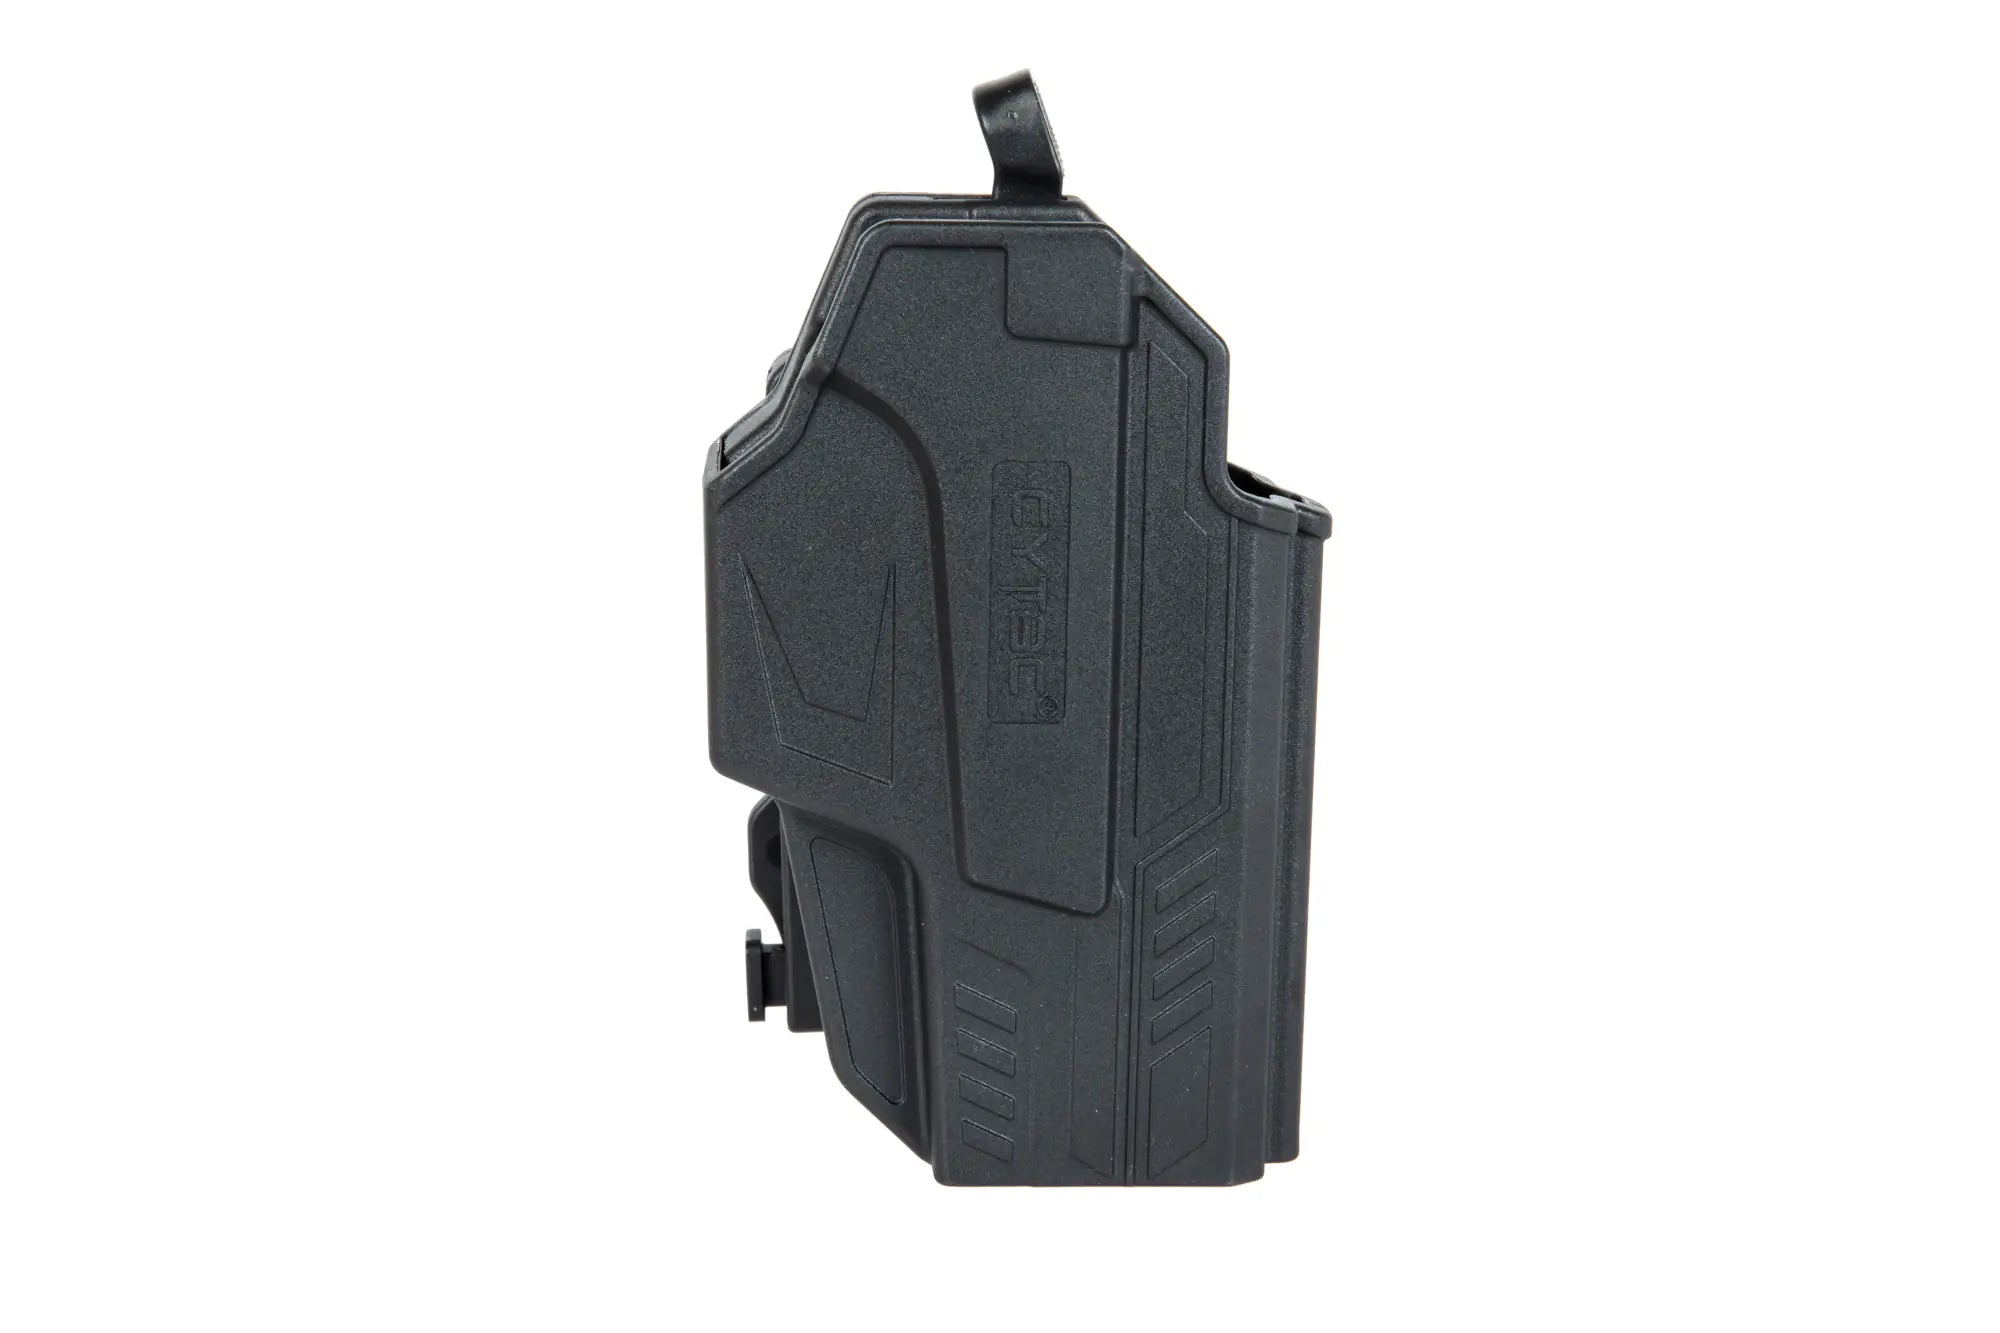 ThumbSmart Series holster with belt clip - Black